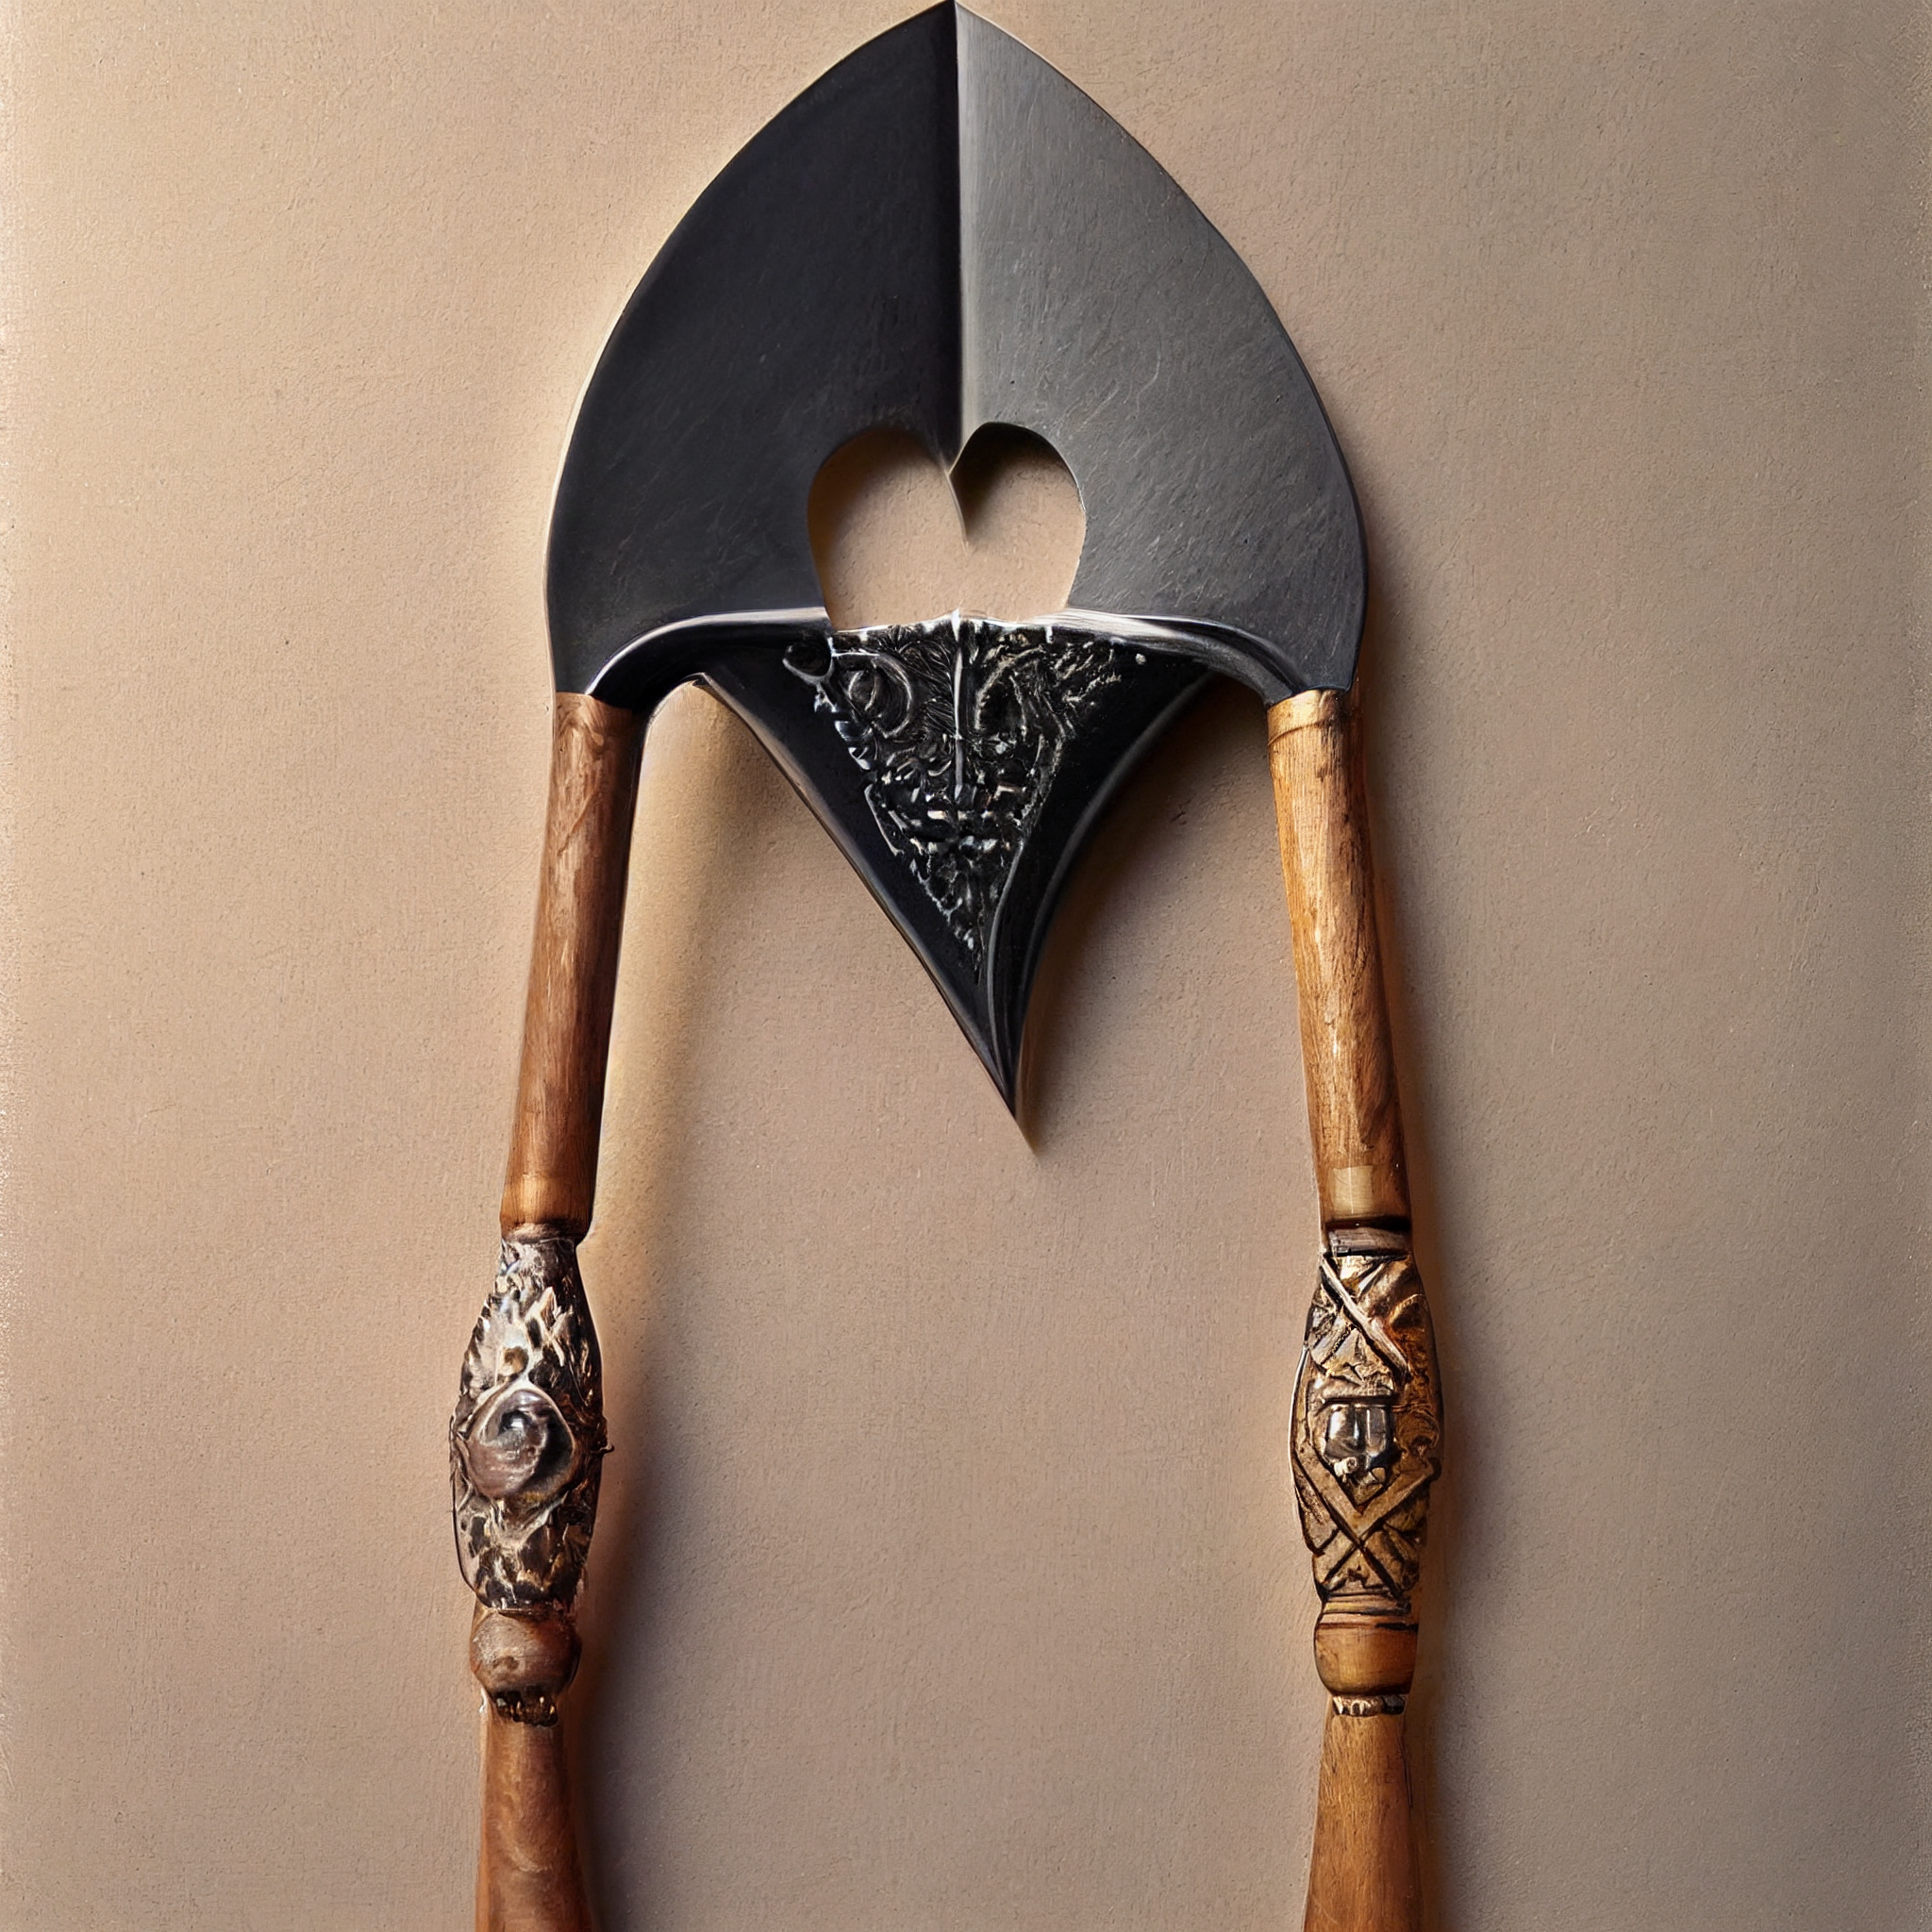 EricdeBroche_A_spade_with_two_handles_and_one_blade_on_each_han_b7f0b9a8-2e79-4350-a760-ed24cb3b336a.png